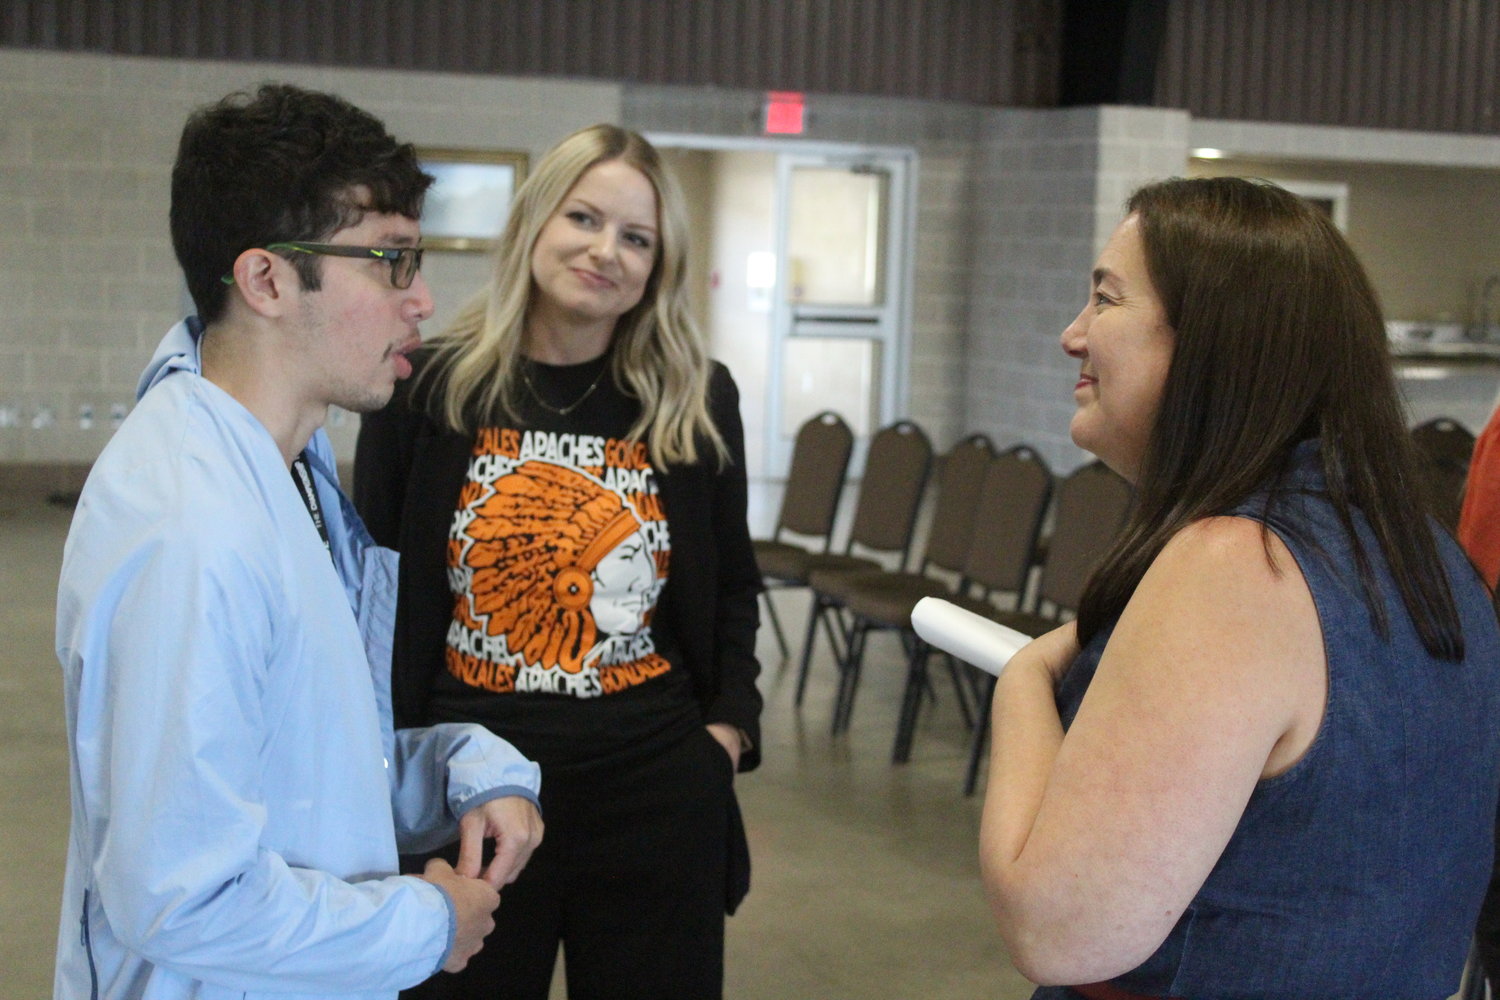 Former Gonzales student now Campus Technician Carlos Blanco with his former English teacher now GISD Director of Federal Programs Amanda Fullilove with Erin Gruwell. Blanco talks about working as peers with his former English teacher since graduating from GHS in 2016.